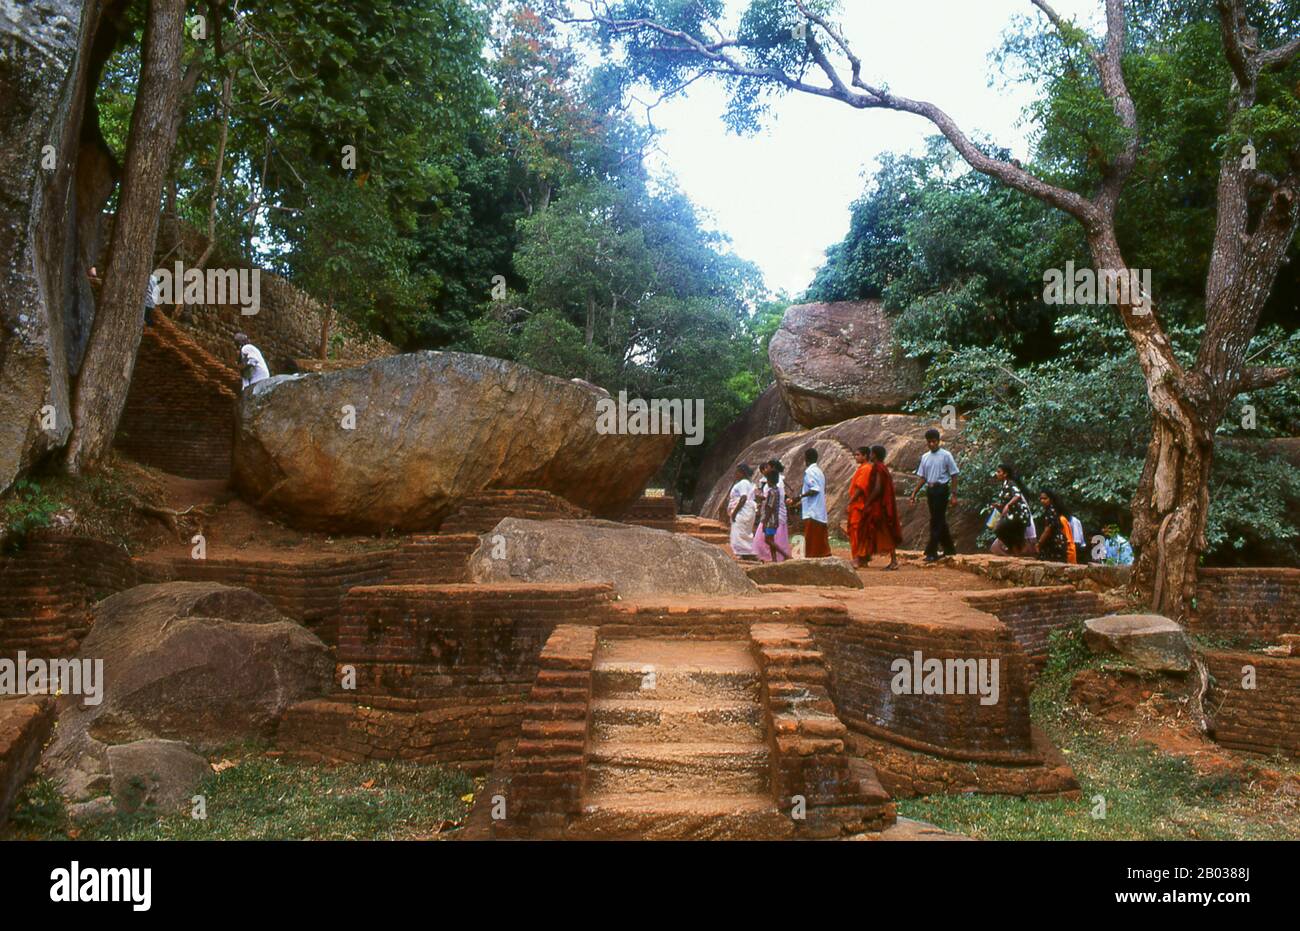 Sigiriya (Lion's rock) is an ancient rock fortress and palace ruin situated in the central Matale District of Sri Lanka, surrounded by the remains of an extensive network of gardens, reservoirs, and other structures. Sigiriya was built during the reign of King Kasyapa I (CE 477 – 495) and after his death it was used as a Buddhist monastery until the 14th century. Stock Photo